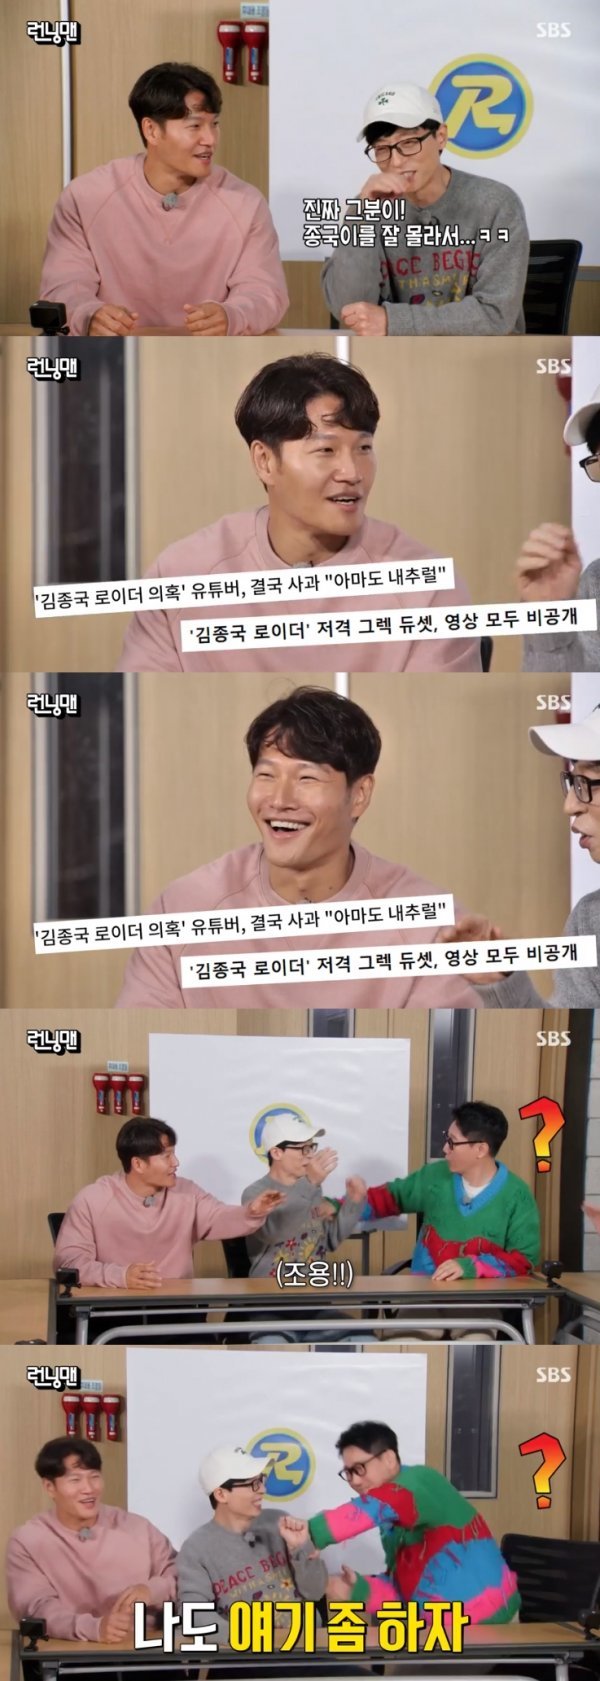 Kim Jong-kook was nervous about Did you prepare my Doping in sport test at the opening of SBS Running Man broadcast on the 21st.When the production team set up a meeting room as if it were a countermeasure meeting, Kim Jong-kook said, If you are a little bit, you will pass on such a word (Royder suspicion), and I am Anyang Koraji.Ill show you Anyang Corridor, he said. Ill go to the end.I think he (Health YouTuber Greg Ducet, who raised the Royder suspicion on Kim Jong-kook), didnt know Kim Jong-kook well, said Yoo Jae-Suk, laughing.Earlier this month, Greg Ducet raised the Royder allegations against Kim Jong-kook, who launched a counterattack.It seems to be a good content. 391 Doping in sport tests were conducted.Still, Greg Ducet and some other netizens did not stop Kim Jong-kook Royders suspicions, and Kim Jong-kook went on a bigger counterattack.He said he would proceed with legal action against malicious comments.Kim Jong-kook said, We put the law first rather than the fist. The Doping in sport test results may be a little late.As soon as the results come out, I will post the final verification video and upload positive content again. However, I am an entertainer.I think that the role of giving pleasure and happiness to many people while living in the entertainment industry for 27 years is the biggest.I thought catharsis, which is obtained by writing or swearing malicious comments (bad comments), was part of the role of entertainers, but I thought it was too much as I went through this.Kim Jong-kook said, I would like to let you know that I can suffer great damage when I produce rumors and make malicious comments or act like that.As a person, at least as a man, I want to give you an opportunity to apologize and accept it nicely, said Greg Ducet, who first raised the Royder suspicion. If the Doping in sport test results come out, whether you apologize or not, I will finish it unconditionally.I think we should do something about this, he said.After Kim Jong-kooks declaration of legal action, Greg Ducet previously closed the video, which raised the Royder allegations.But if Kim Jong-kook responds toughly, the Greg Ducet YouTube channel account may be permanently deleted.According to YouTube regulations, inciting based on false information can delete or permanently delete the account if the video is deleted or severe.